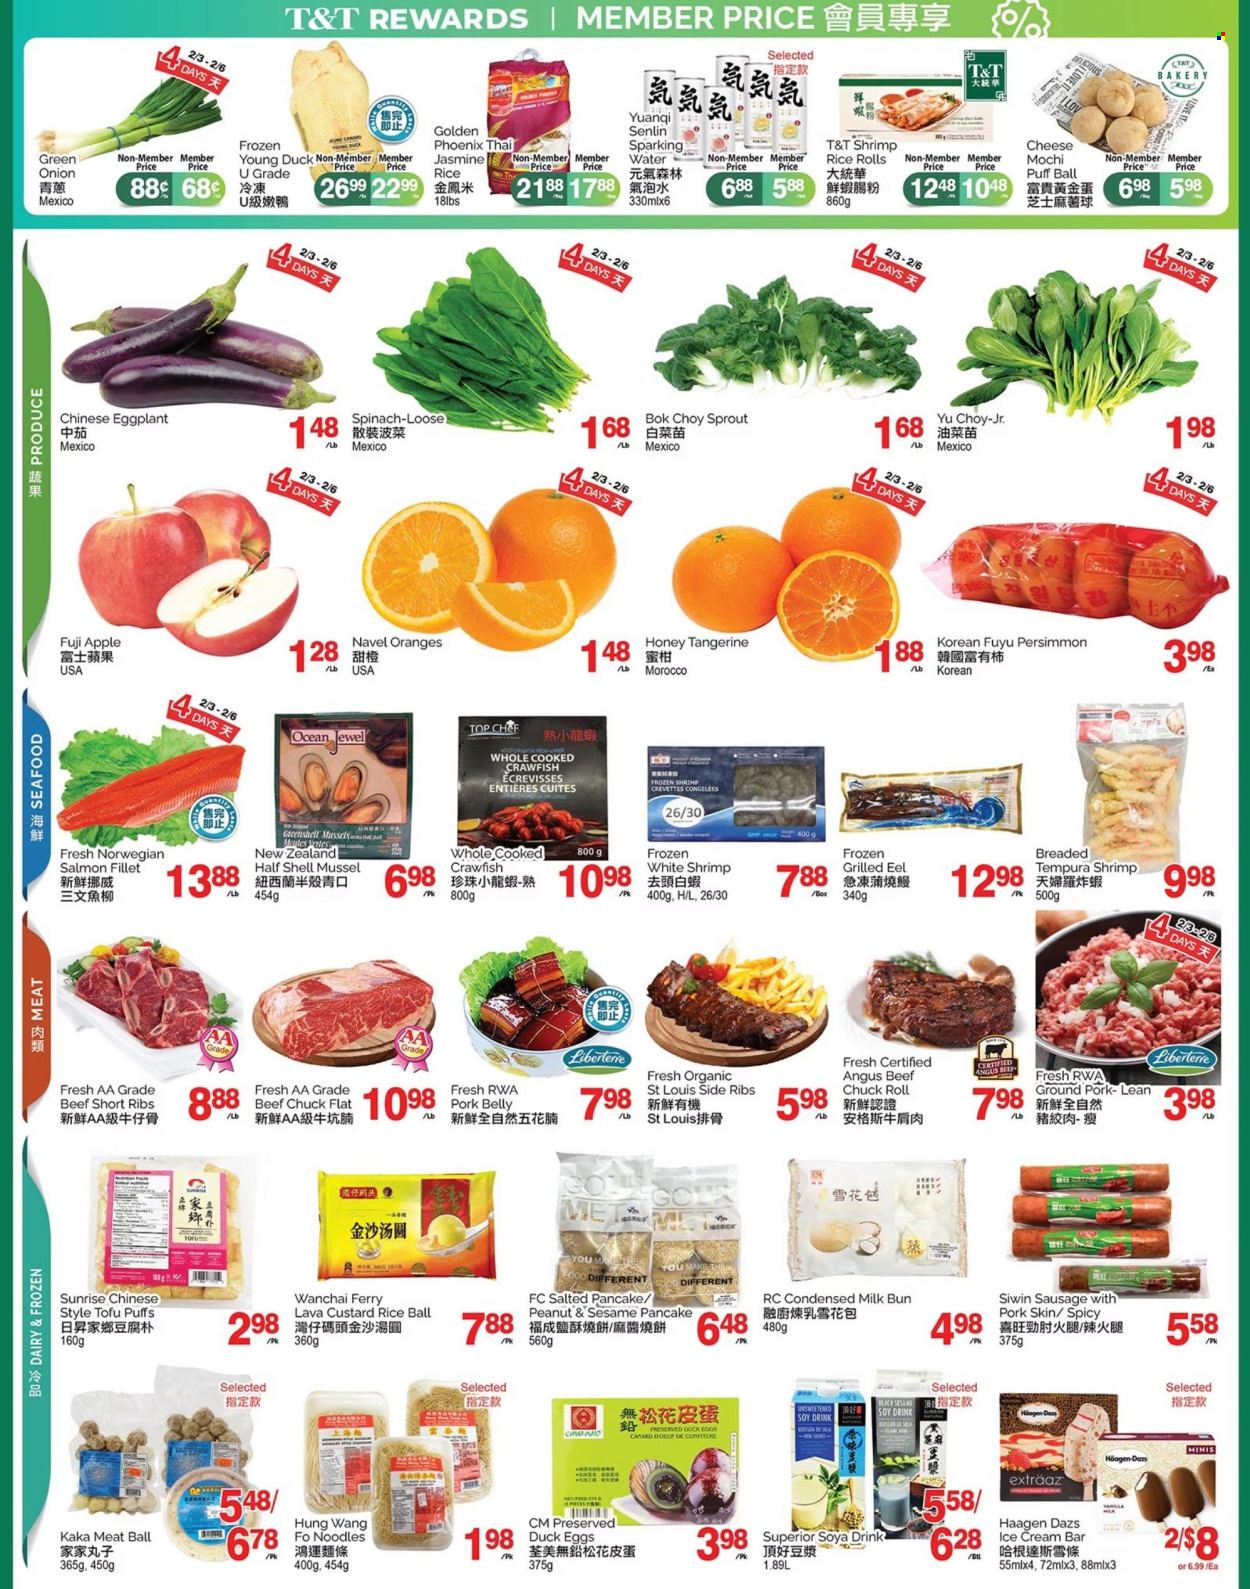 thumbnail - T&T Supermarket Flyer - February 03, 2023 - February 09, 2023 - Sales products - puffs, bok choy, spinach, onion, eggplant, green onion, persimmons, Fuji apple, oranges, navel oranges, eel, mussels, salmon, salmon fillet, seafood, shrimps, pancakes, noodles, sausage, tofu, custard, milk, condensed milk, ice cream, Häagen-Dazs, crawfish, jasmine rice, honey, beef meat, beef ribs, chuck steak, ribs, ground pork, pork belly, pork meat, folder. Page 2.